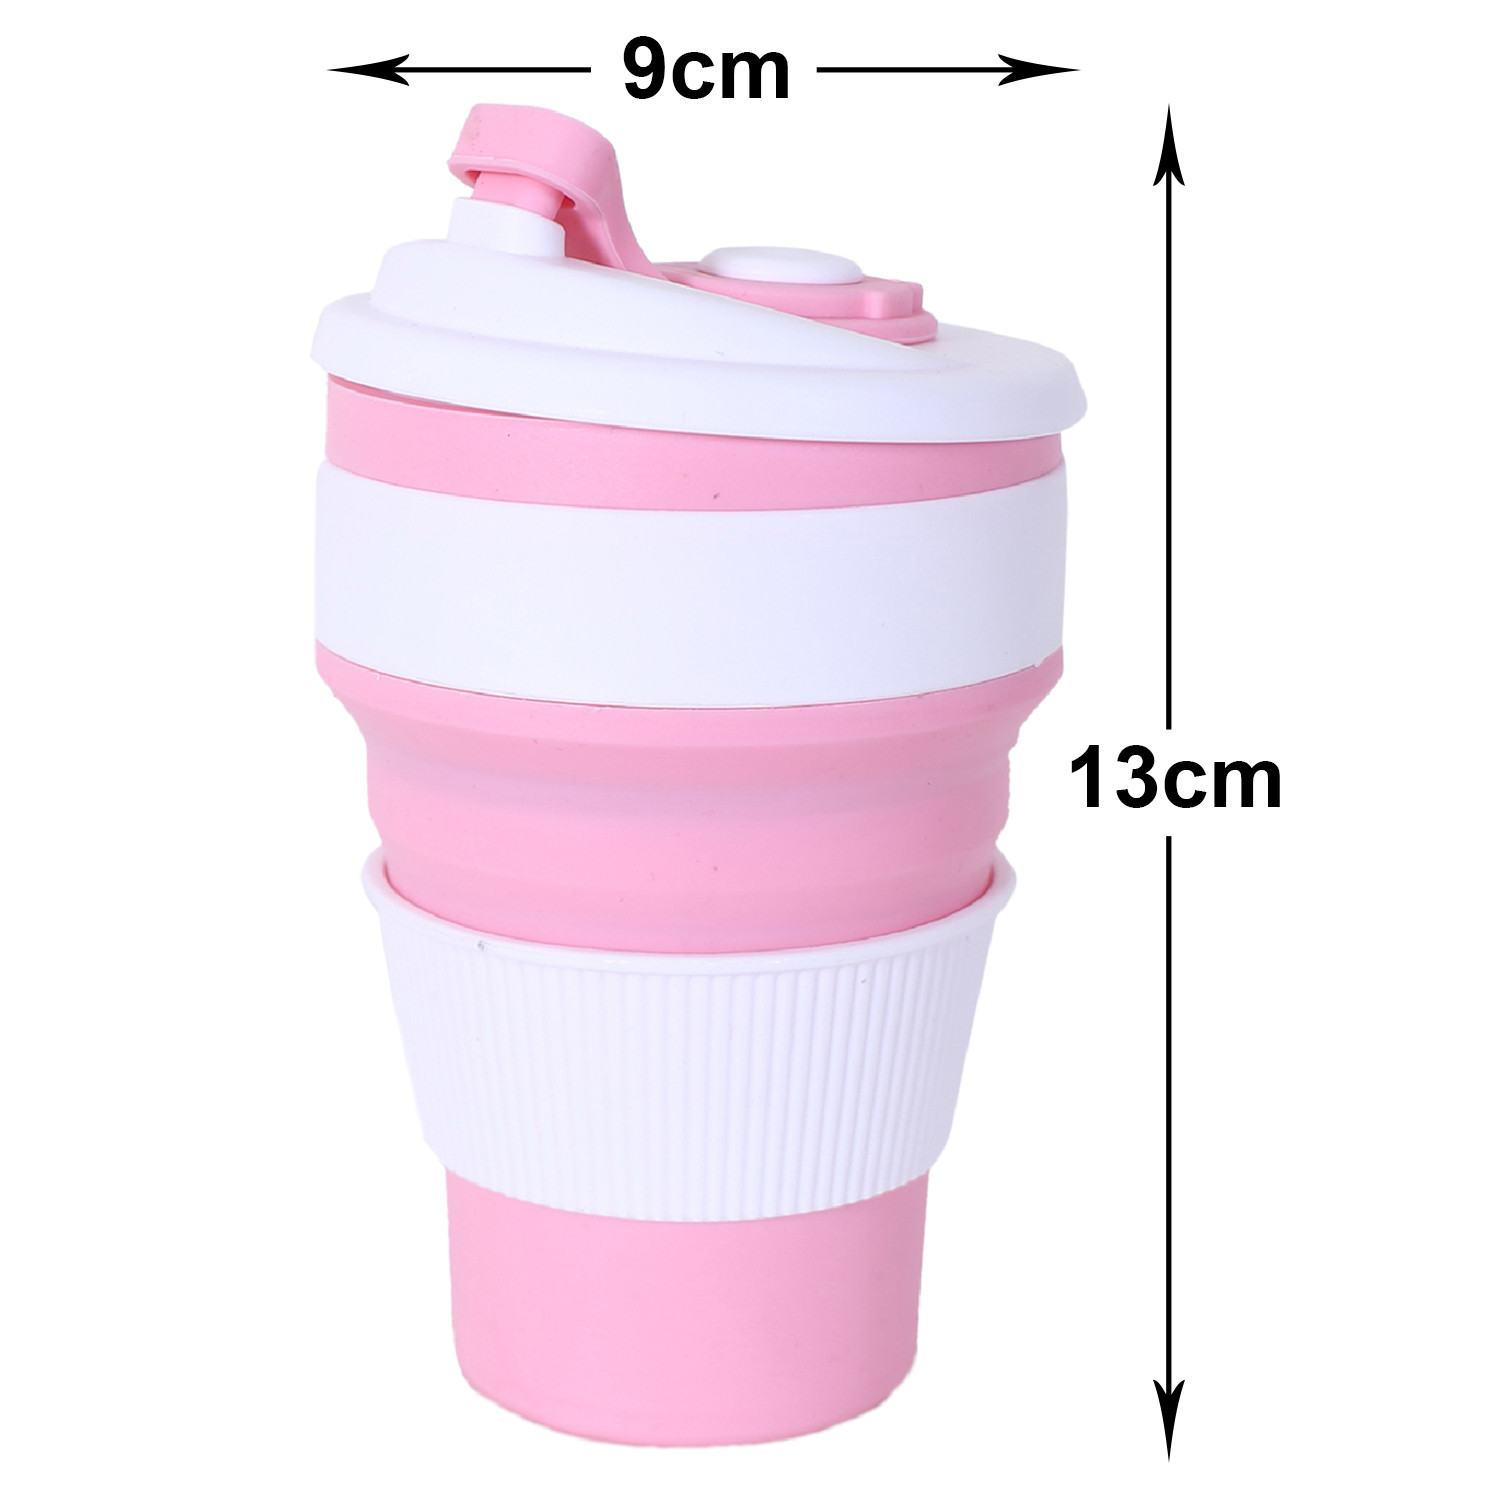 Kuber Industries Collapsible Coffee Cup|Silicone Portable Travel Coffee Mug|Camping Cup with Lid for Travel,Hiking Outdoors,350 ML,(Pink)